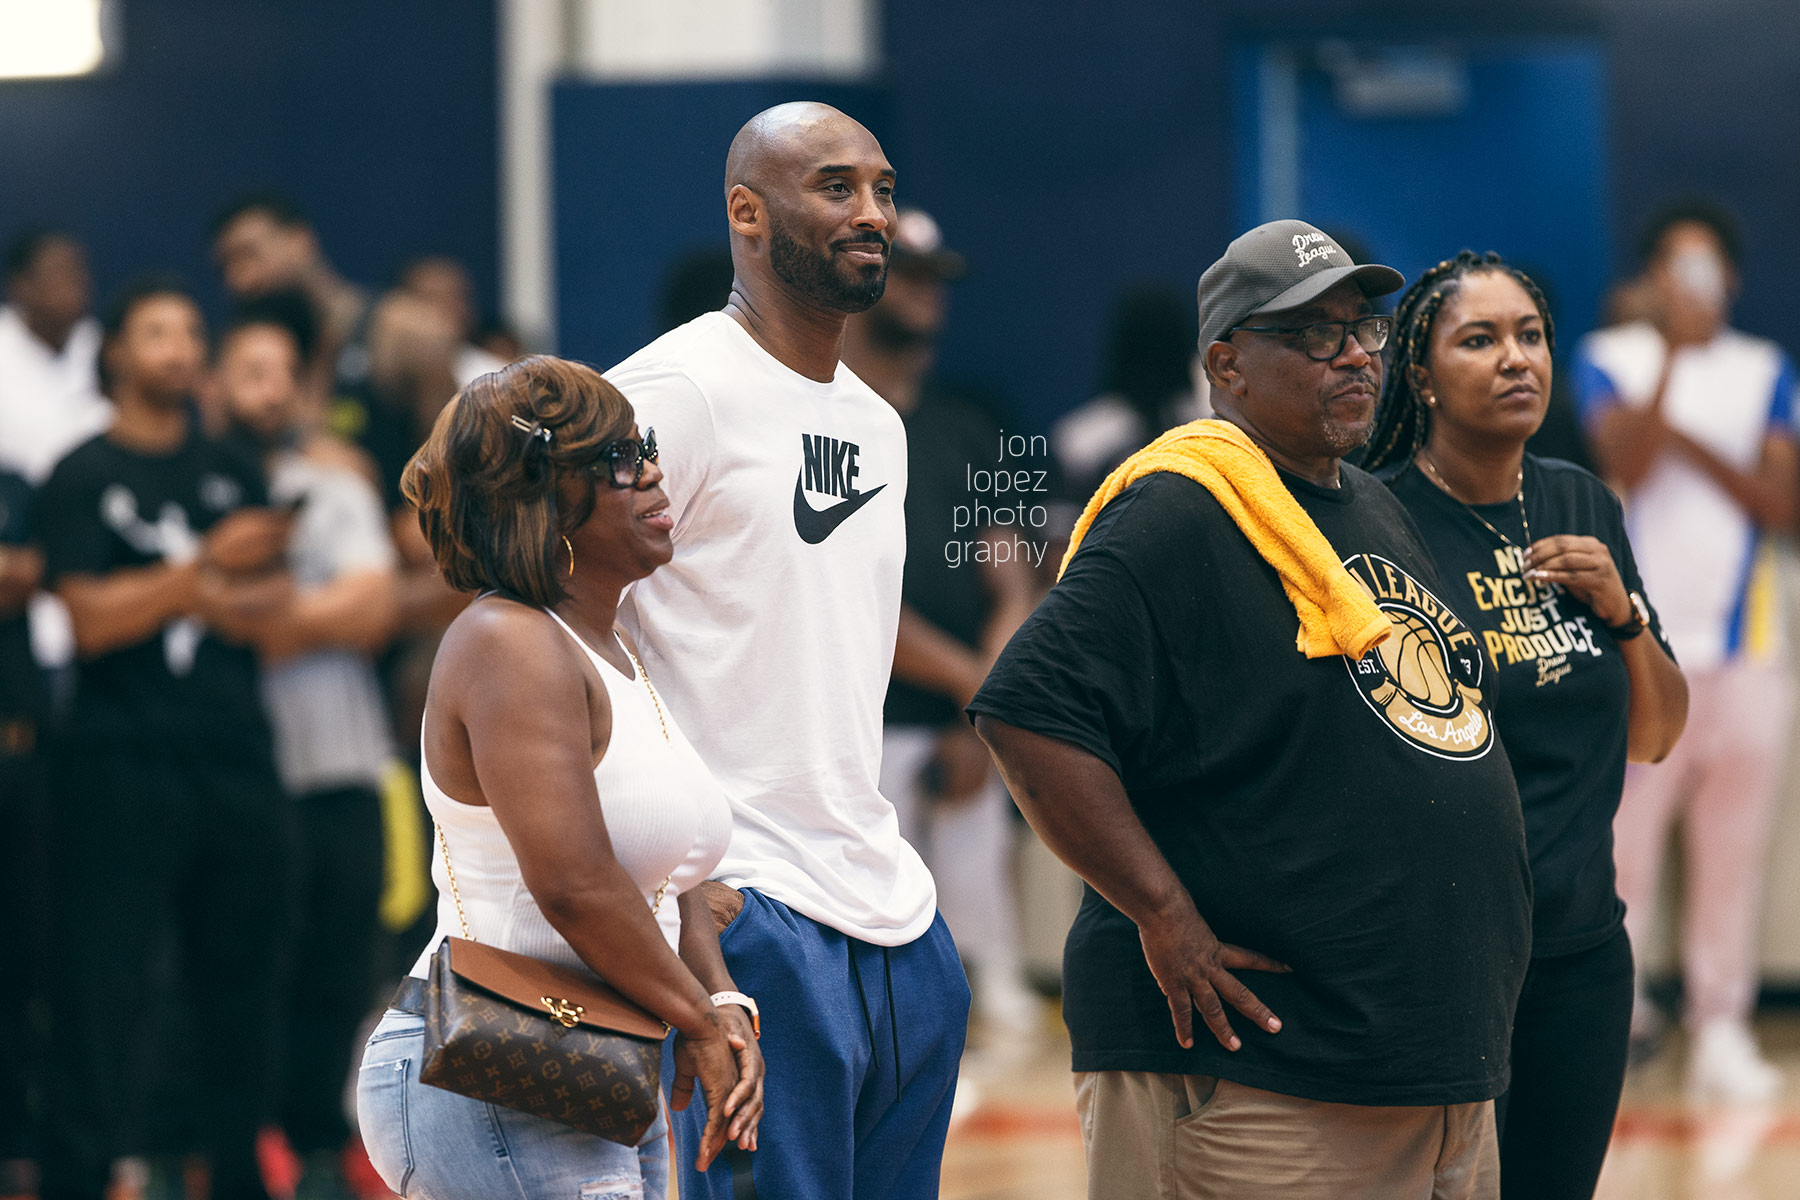 The Drew League: 'No Excuse, Just Produce